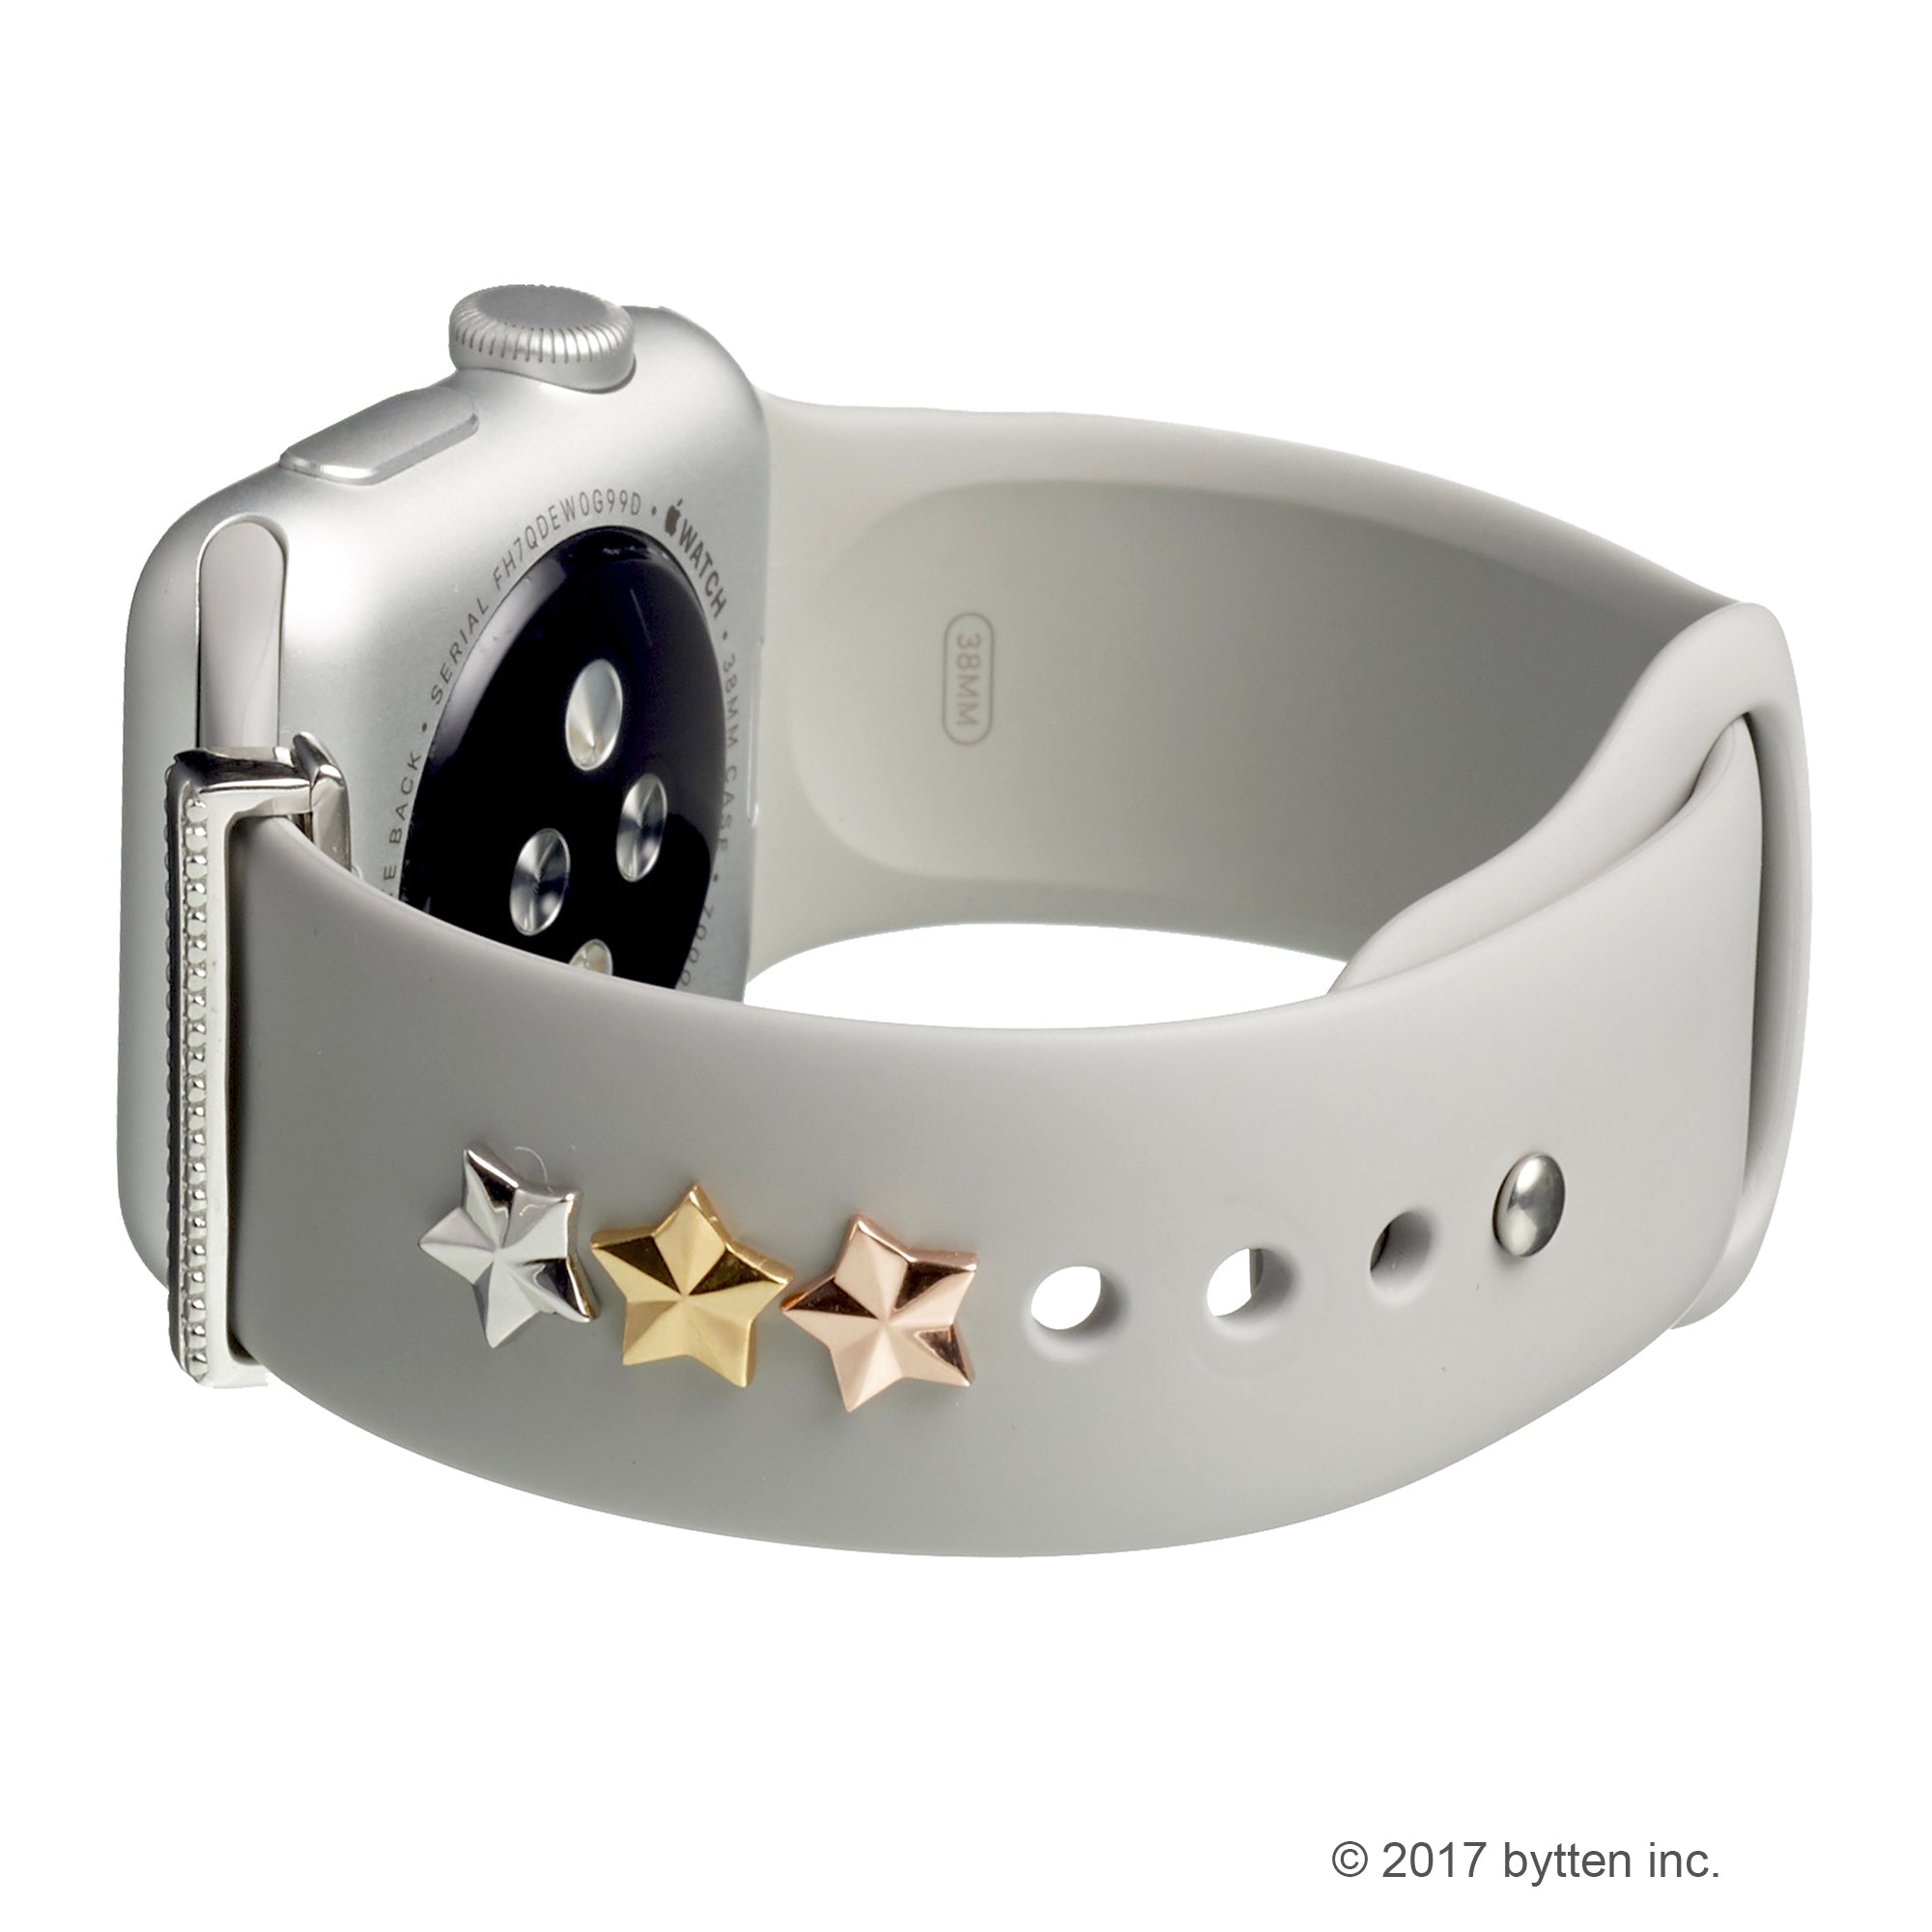 bytten apple watch star iwatch charms in rose gold, silver and gold